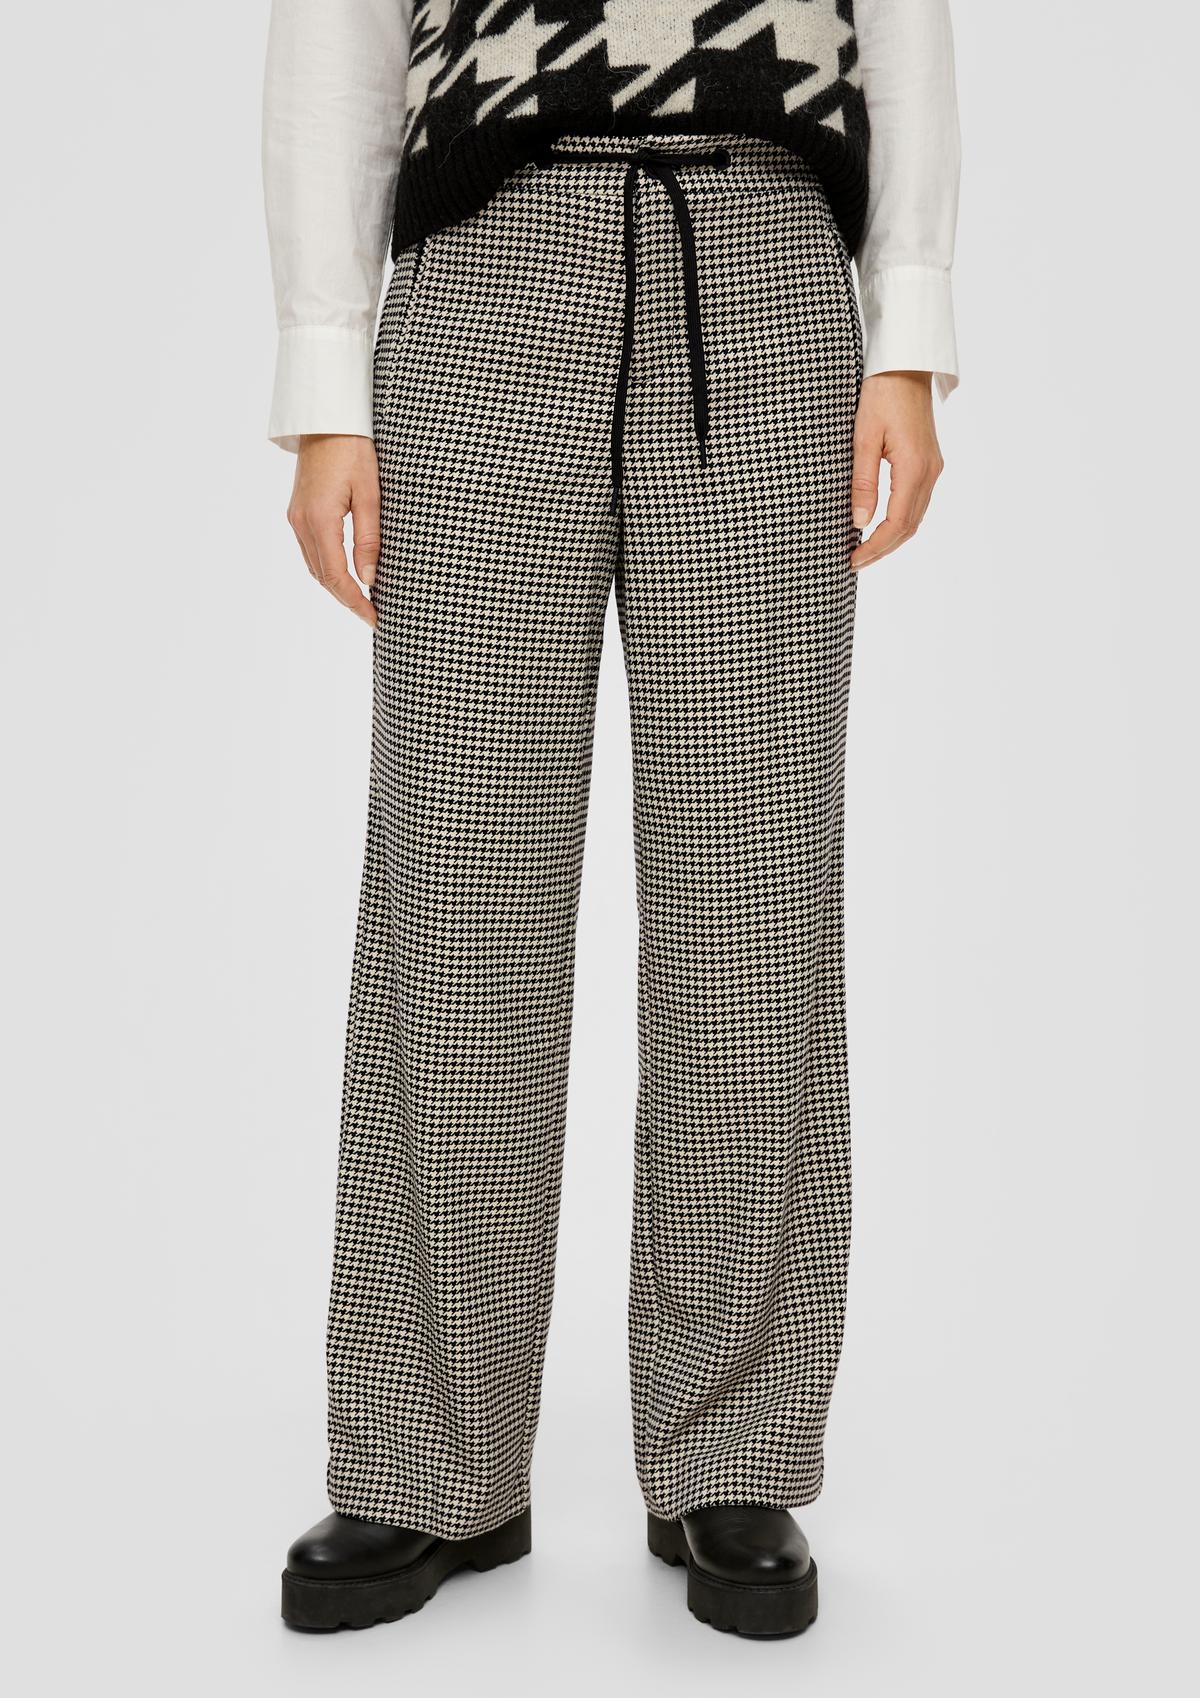 Regular fit: wide-leg trousers with a houndstooth pattern